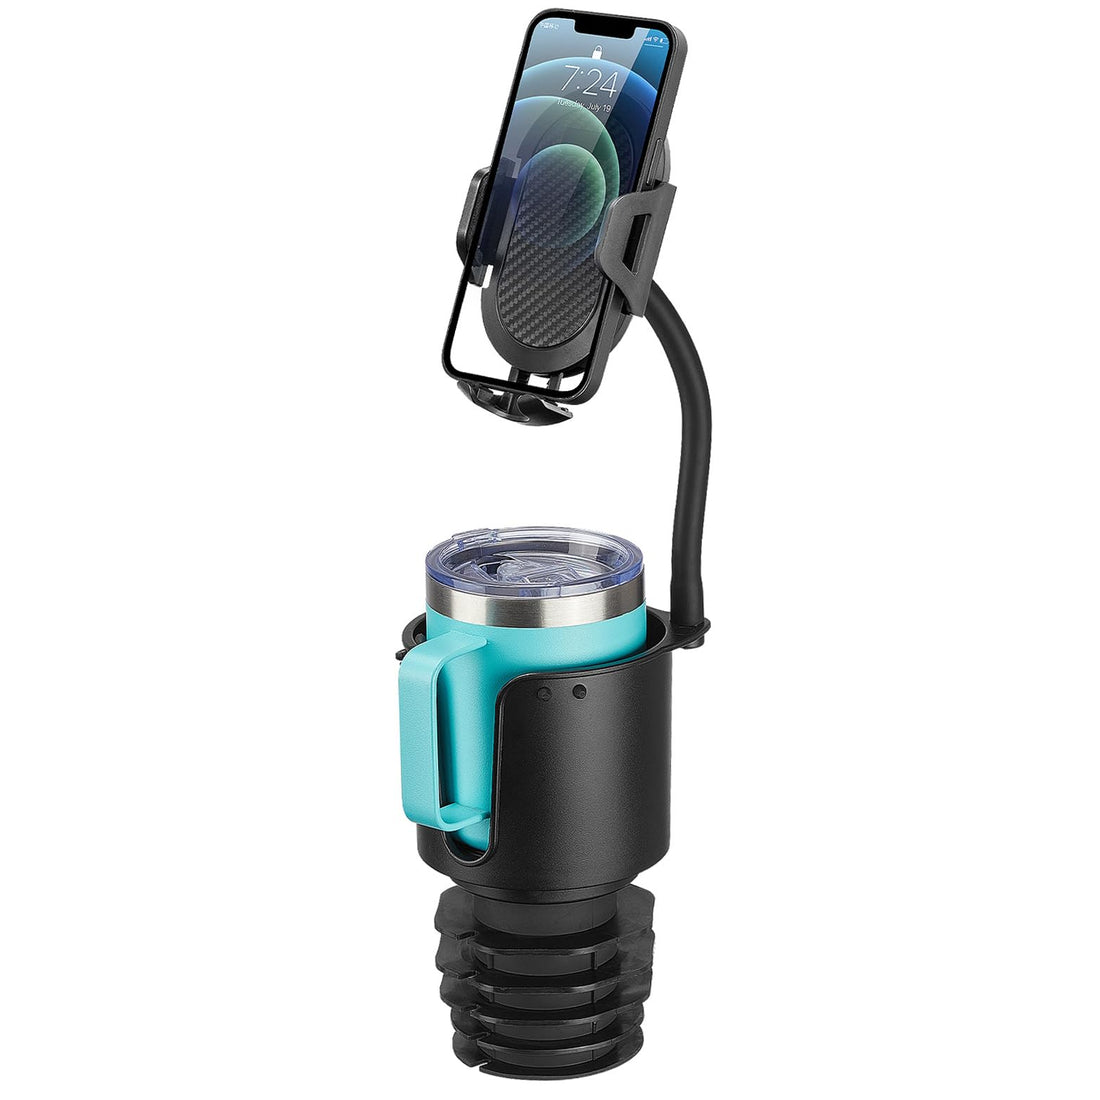 Car Cup Holder Phone Mount Cell Phone Holder Universal Perfect for Smartphones up to 6.7"